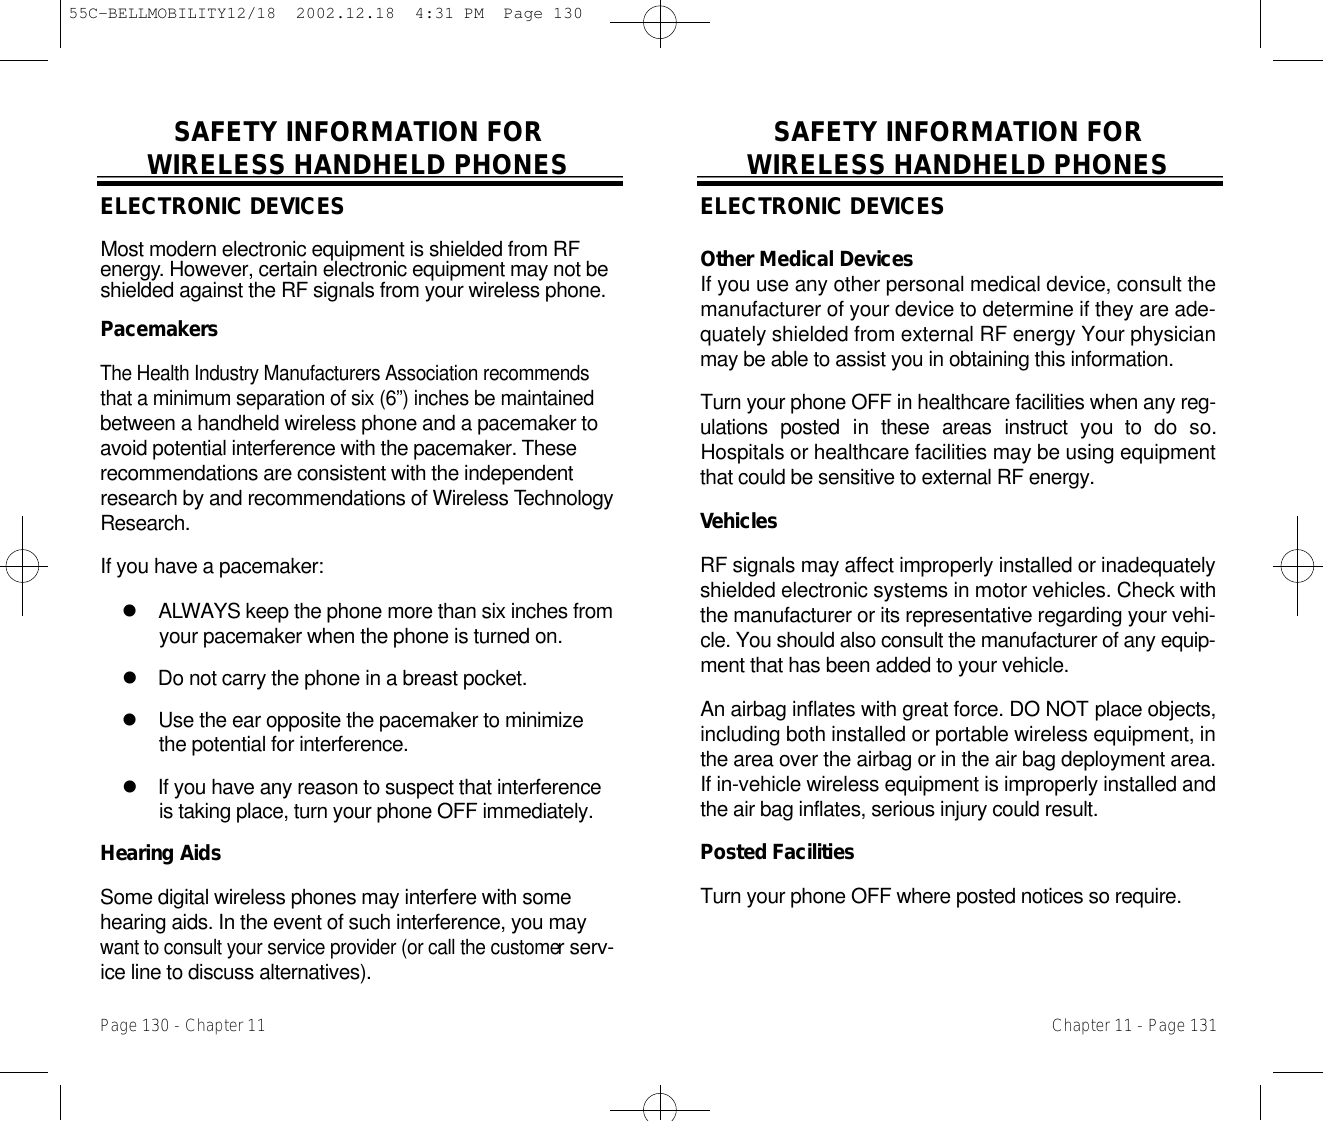 SAFETY INFORMATION FOR WIRELESS HANDHELD PHONESELECTRONIC DEVICESOther Medical DevicesIf you use any other personal medical device, consult themanufacturer of your device to determine if they are ade-quately shielded from external RF energy Your physicianmay be able to assist you in obtaining this information.Turn your phone OFF in healthcare facilities when any reg-ulations  posted  in  these  areas  instruct  you  to  do  so.Hospitals or healthcare facilities may be using equipmentthat could be sensitive to external RF energy.Ve h i c l e sRF signals may affect improperly installed or inadequatelyshielded electronic systems in motor vehicles. Check withthe manufacturer or its representative regarding your vehi-cle. You should also consult the manufacturer of any equip-ment that has been added to your vehicle.An airbag inflates with great force. DO NOT place objects,including both installed or portable wireless equipment, inthe area over the airbag or in the air bag deployment area.If in-vehicle wireless equipment is improperly installed andthe air bag inflates, serious injury could result.Posted FacilitiesTurn your phone OFF where posted notices so require.Chapter 11 - Page 131SAFETY INFORMATION FOR WIRELESS HANDHELD PHONESELECTRONIC DEVICESMost modern electronic equipment is shielded from RFe n e r g y. However, certain electronic equipment may not beshielded against the RF signals from your wireless phone.P a c e m a k e r sThe Health Industry Manufacturers Association recommendsthat a minimum separation of six (6”) inches be maintainedbetween a handheld wireless phone and a pacemaker toavoid potential interference with the pacemaker. T h e s erecommendations are consistent with the independentresearch by and recommendations of Wireless Te c h n o l o g yR e s e a r c h .If you have a pacemaker:l A LWAYS keep the phone more than six inches fromyour pacemaker when the phone is turned on.l Do not carry the phone in a breast pocket.l Use the ear opposite the pacemaker to minimizethe potential for interference.l If you have any reason to suspect that interferenceis taking place, turn your phone OFF immediately.Hearing AidsSome digital wireless phones may interfere with somehearing aids. In the event of such interference, you maywant to consult your service provider (or call the customer serv-ice line to discuss alternatives).Page 130 - Chapter 1155C-BELLMOBILITY12/18  2002.12.18  4:31 PM  Page 130